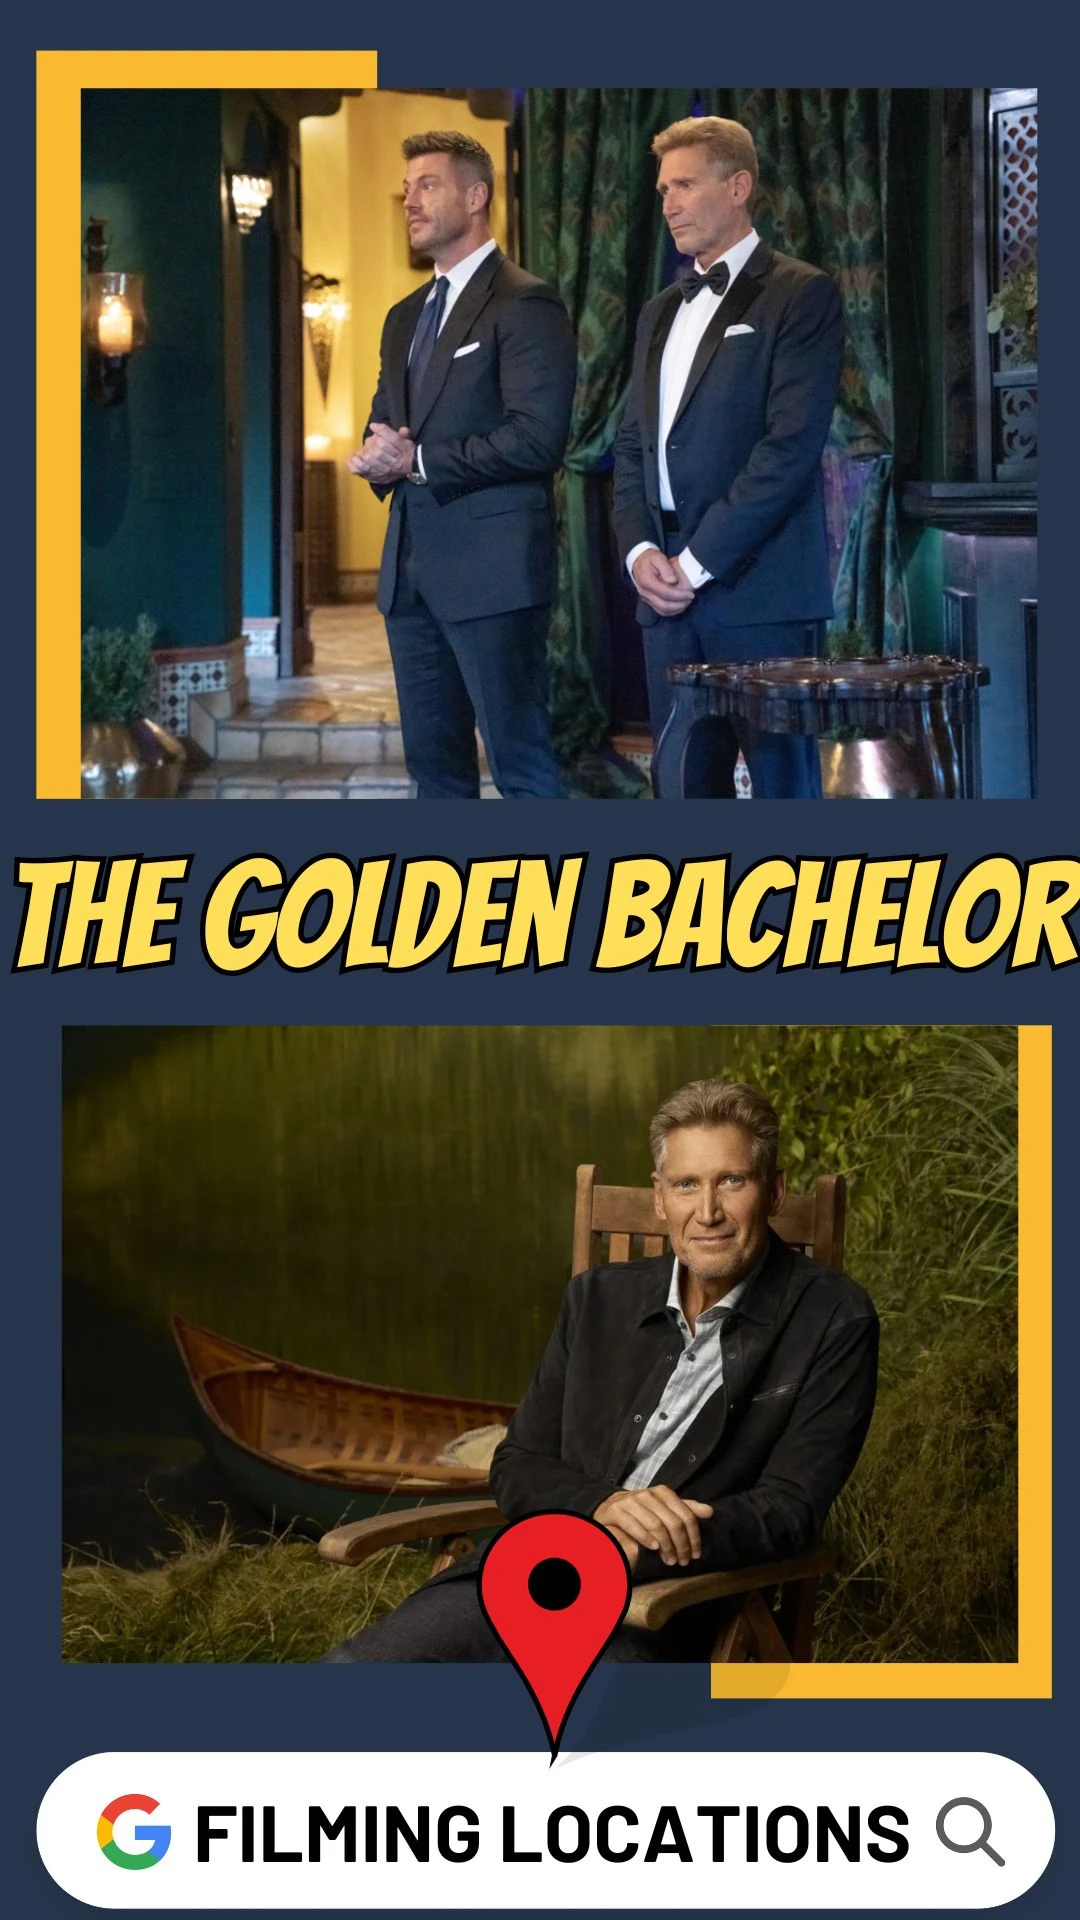 The Golden Bachelor Filming Locations